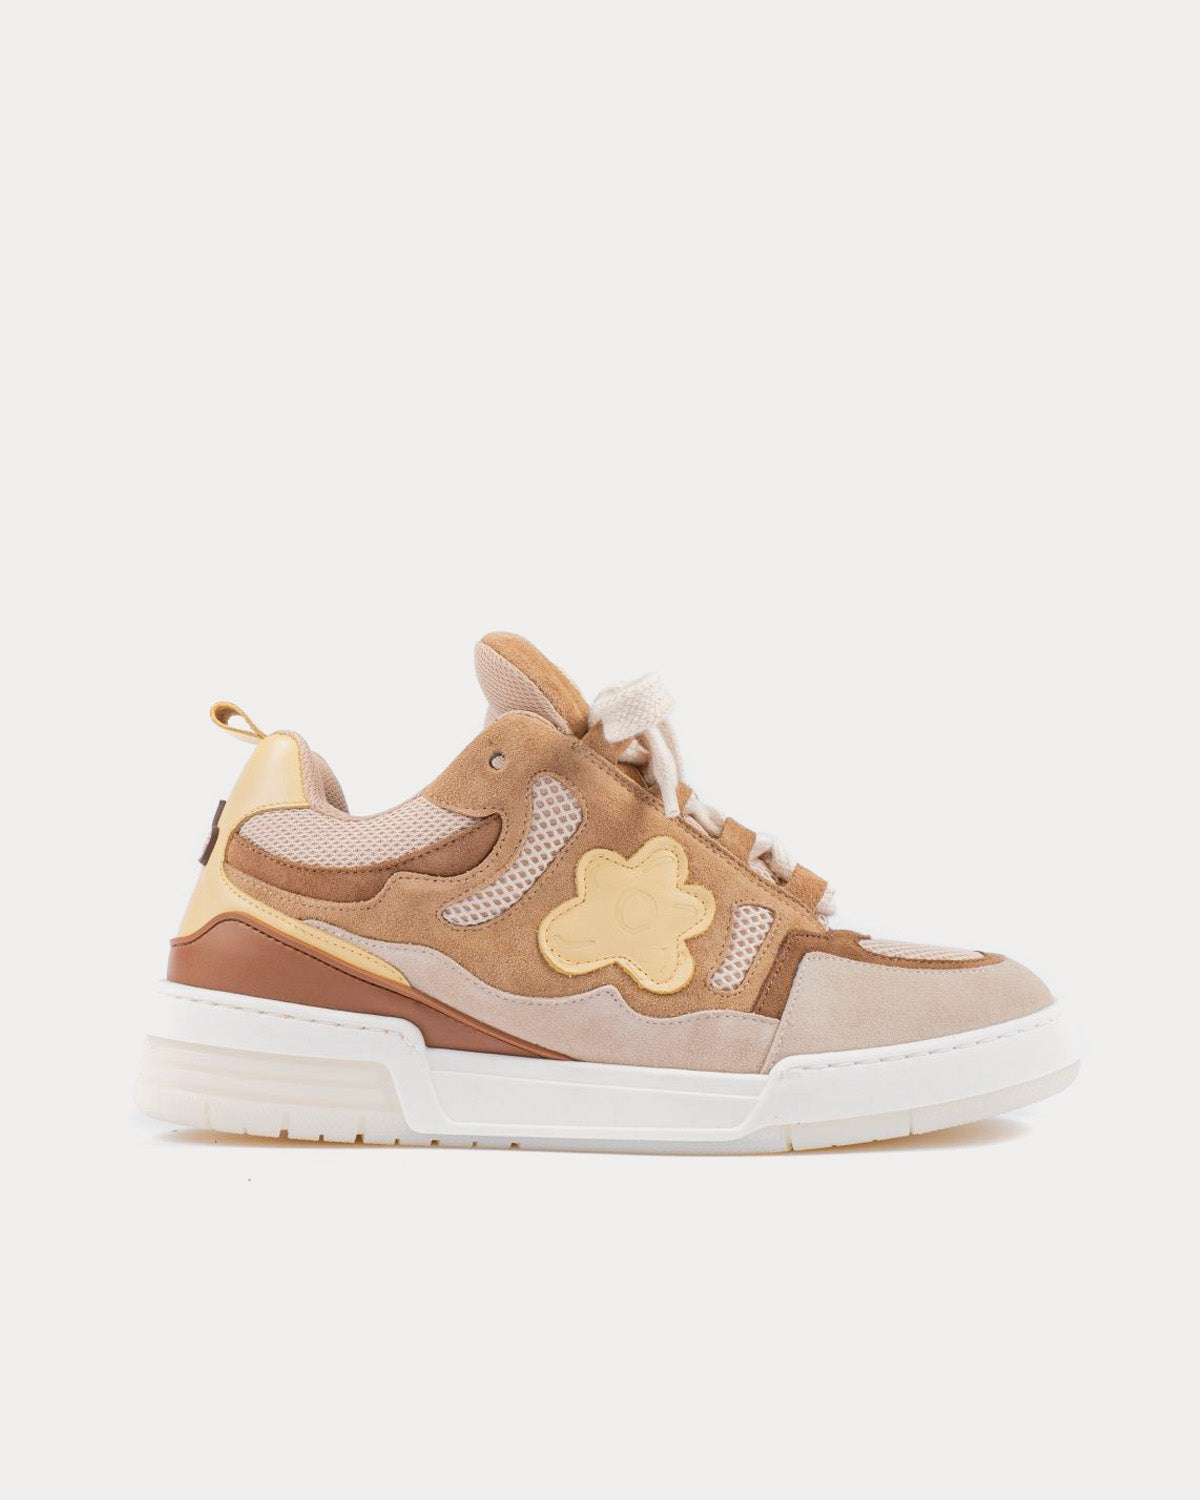 Flower Instincts x Sneakmart - Mad Hunny Beige / White Low Top Sneakers